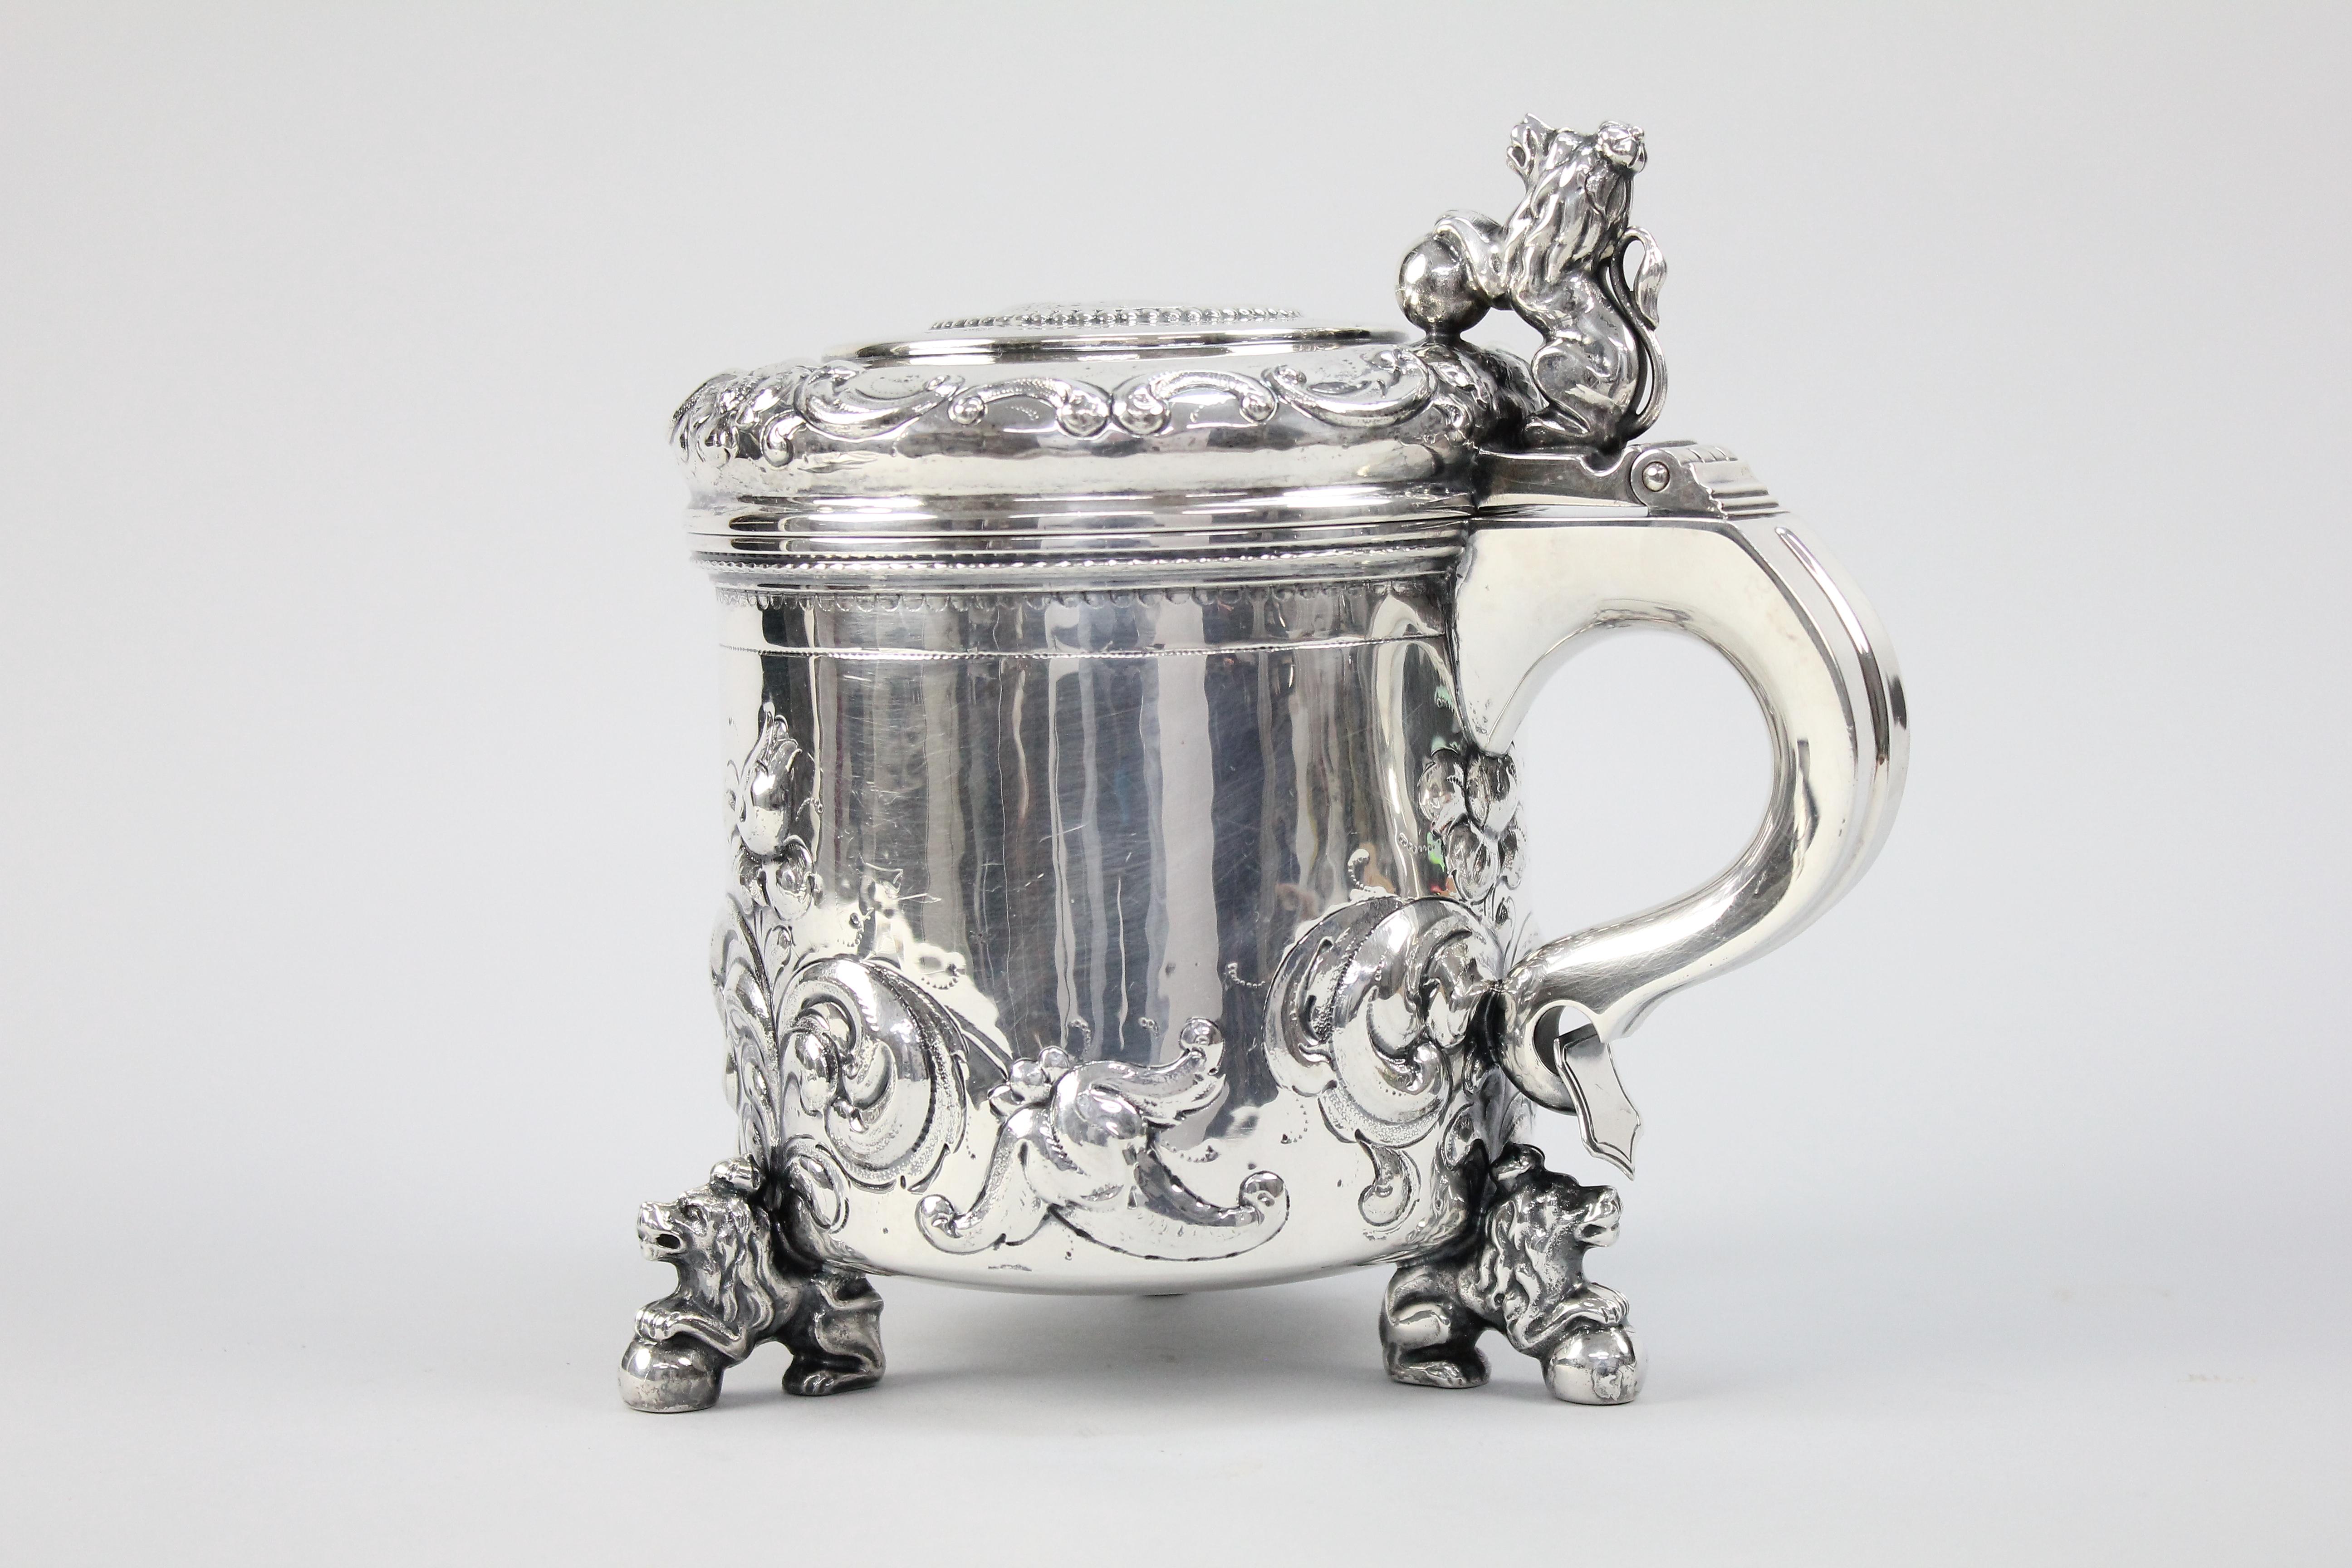 Wonderful Swedish silver lidded tankard by C G Hallberg, Stockholm 1950.
Made in the Scandinavian Baroque style.
With four great shaped lions and two medallions depicting the Swedish king Carolus XI (1655-1697) and his wife Queen Ulrica Eleonora